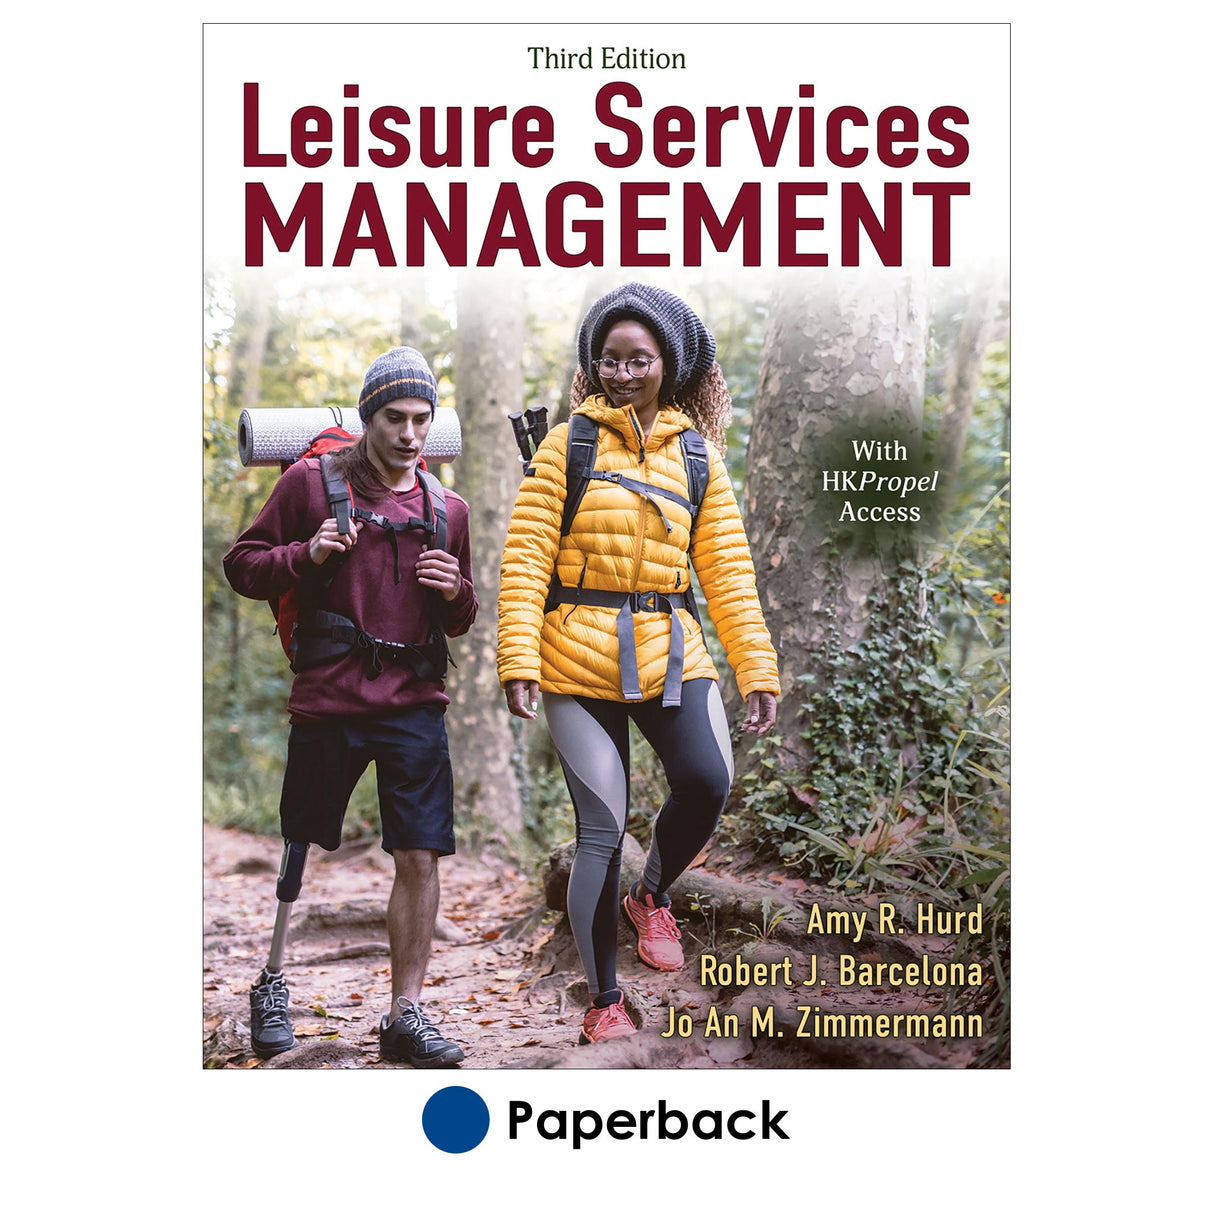 Leisure Services Management 3rd Edition With HKPropel Access